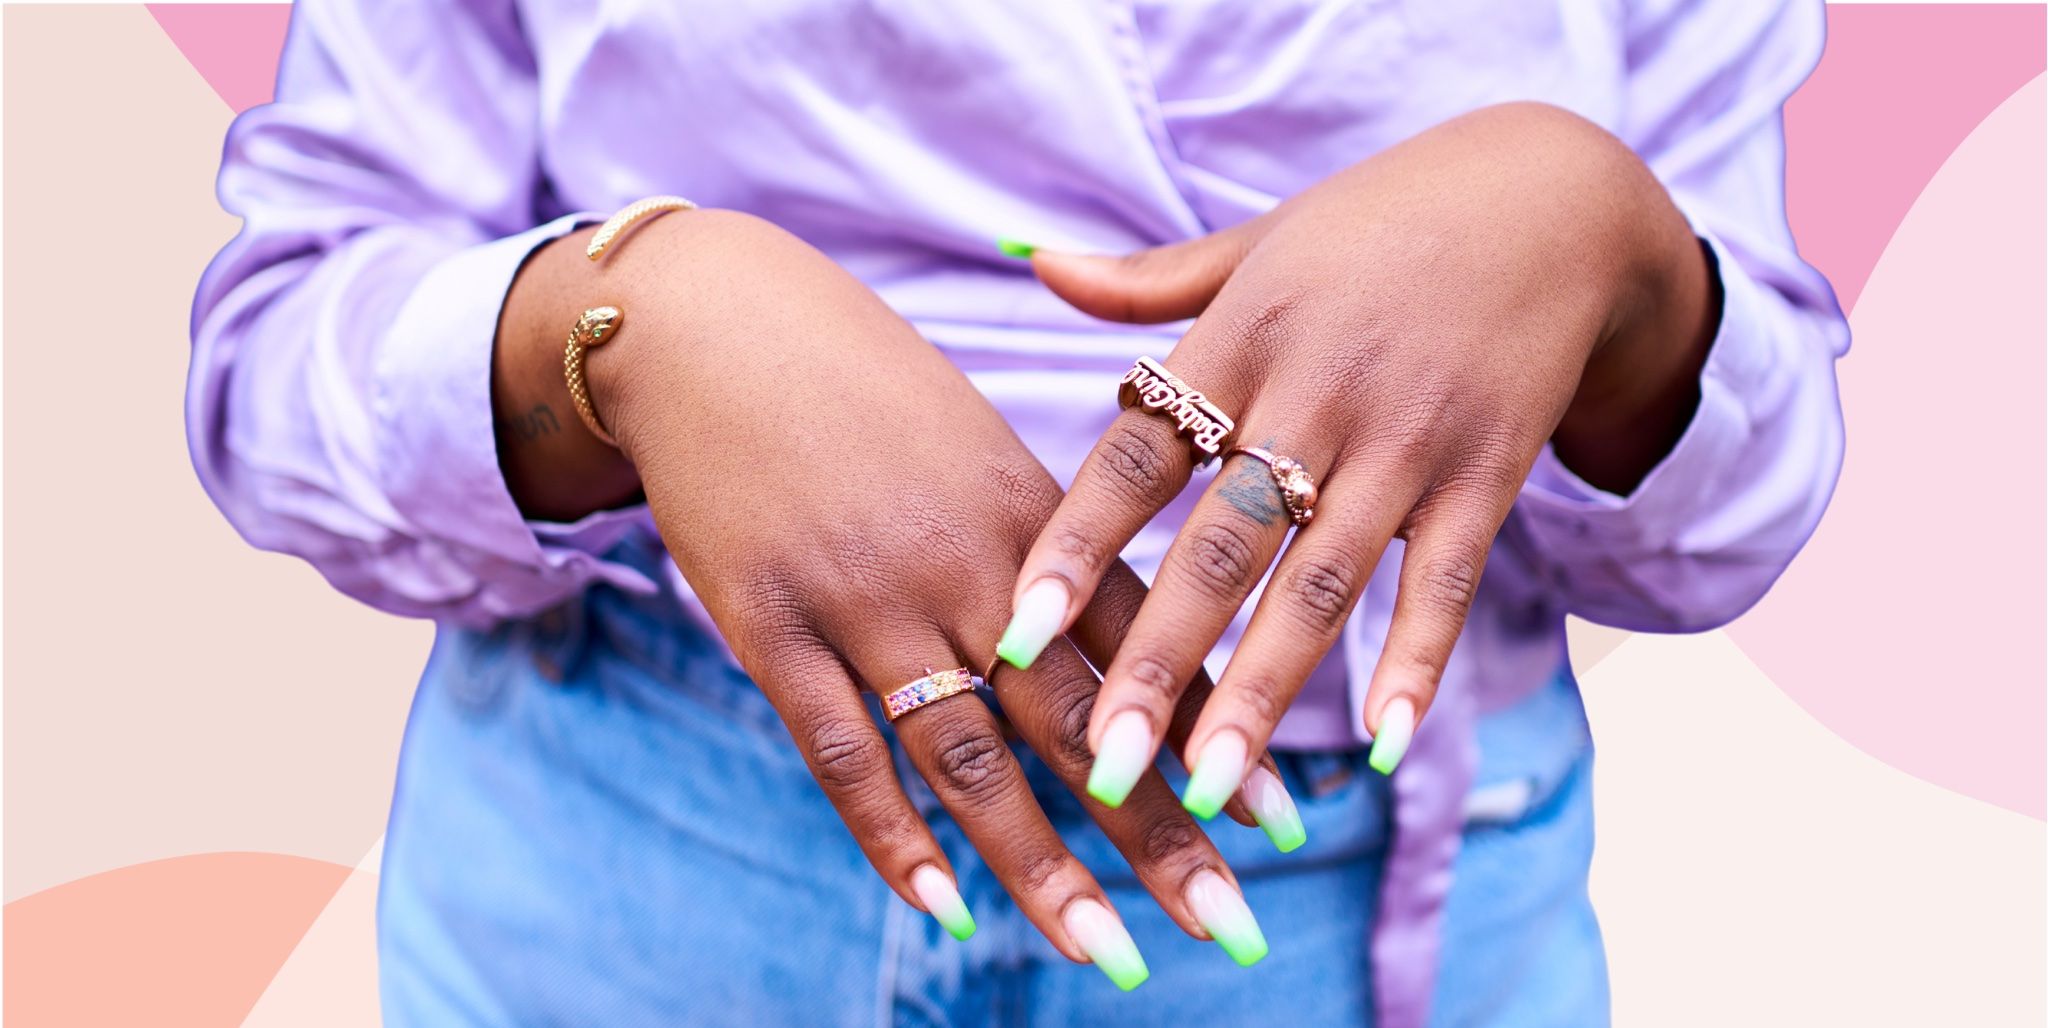 Gel nails VS Shellac nails: What's which is best?